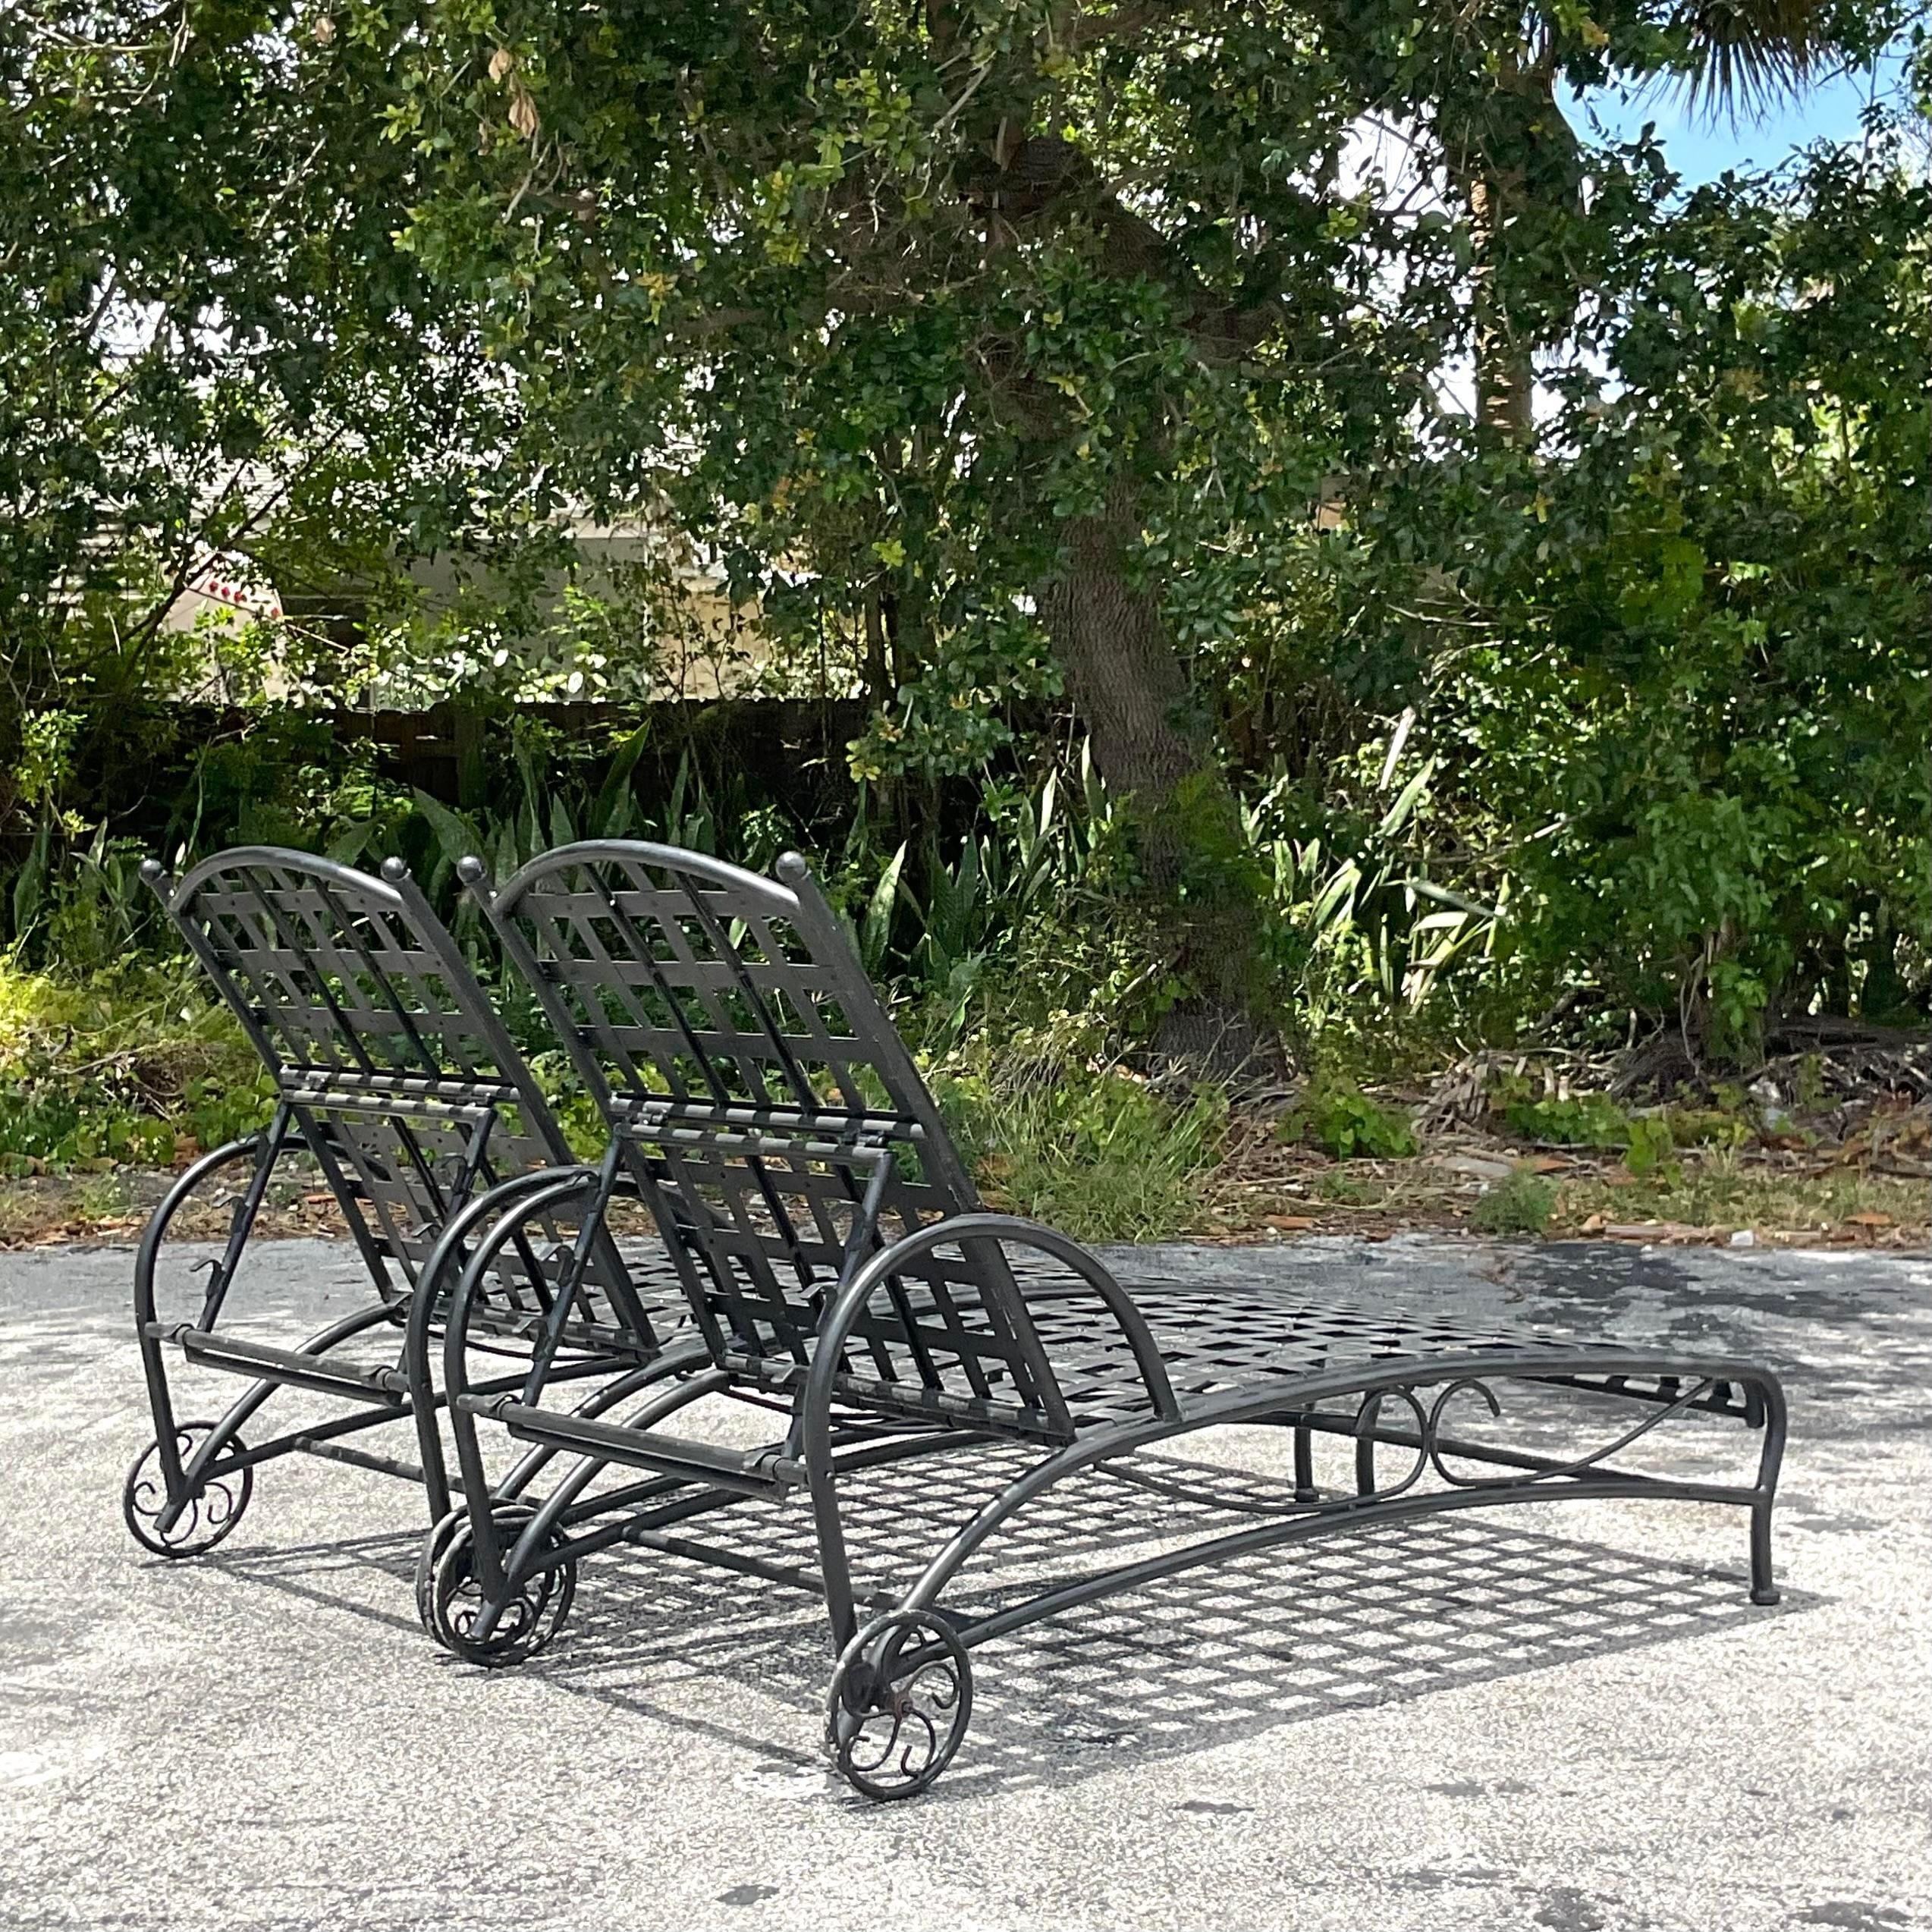 American Vintage Boho Wrought Iron Chaise Lounge Chairs - a Pair For Sale